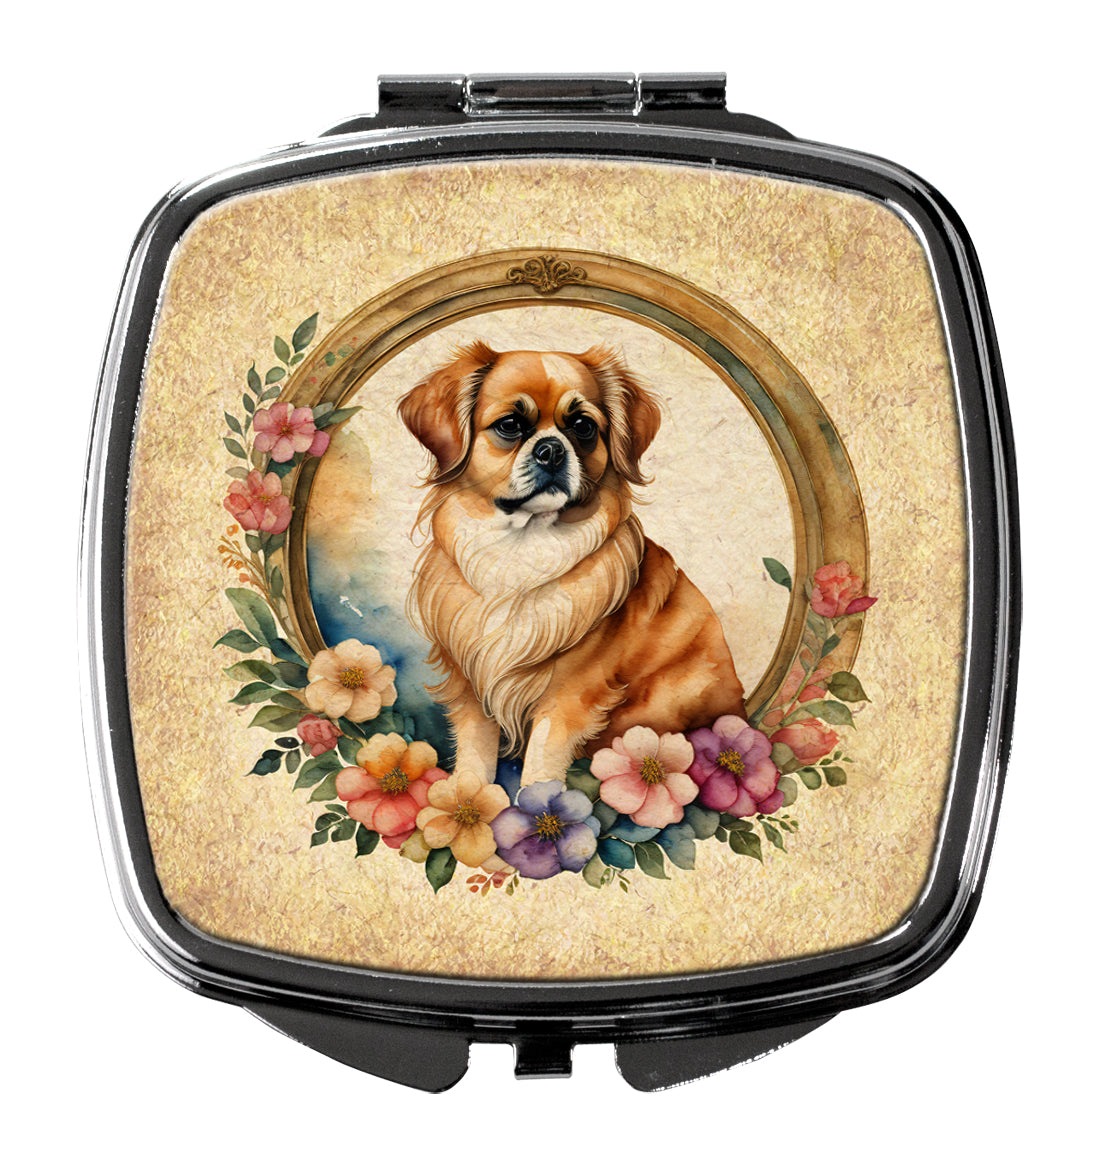 Buy this Tibetan Spaniel and Flowers Compact Mirror